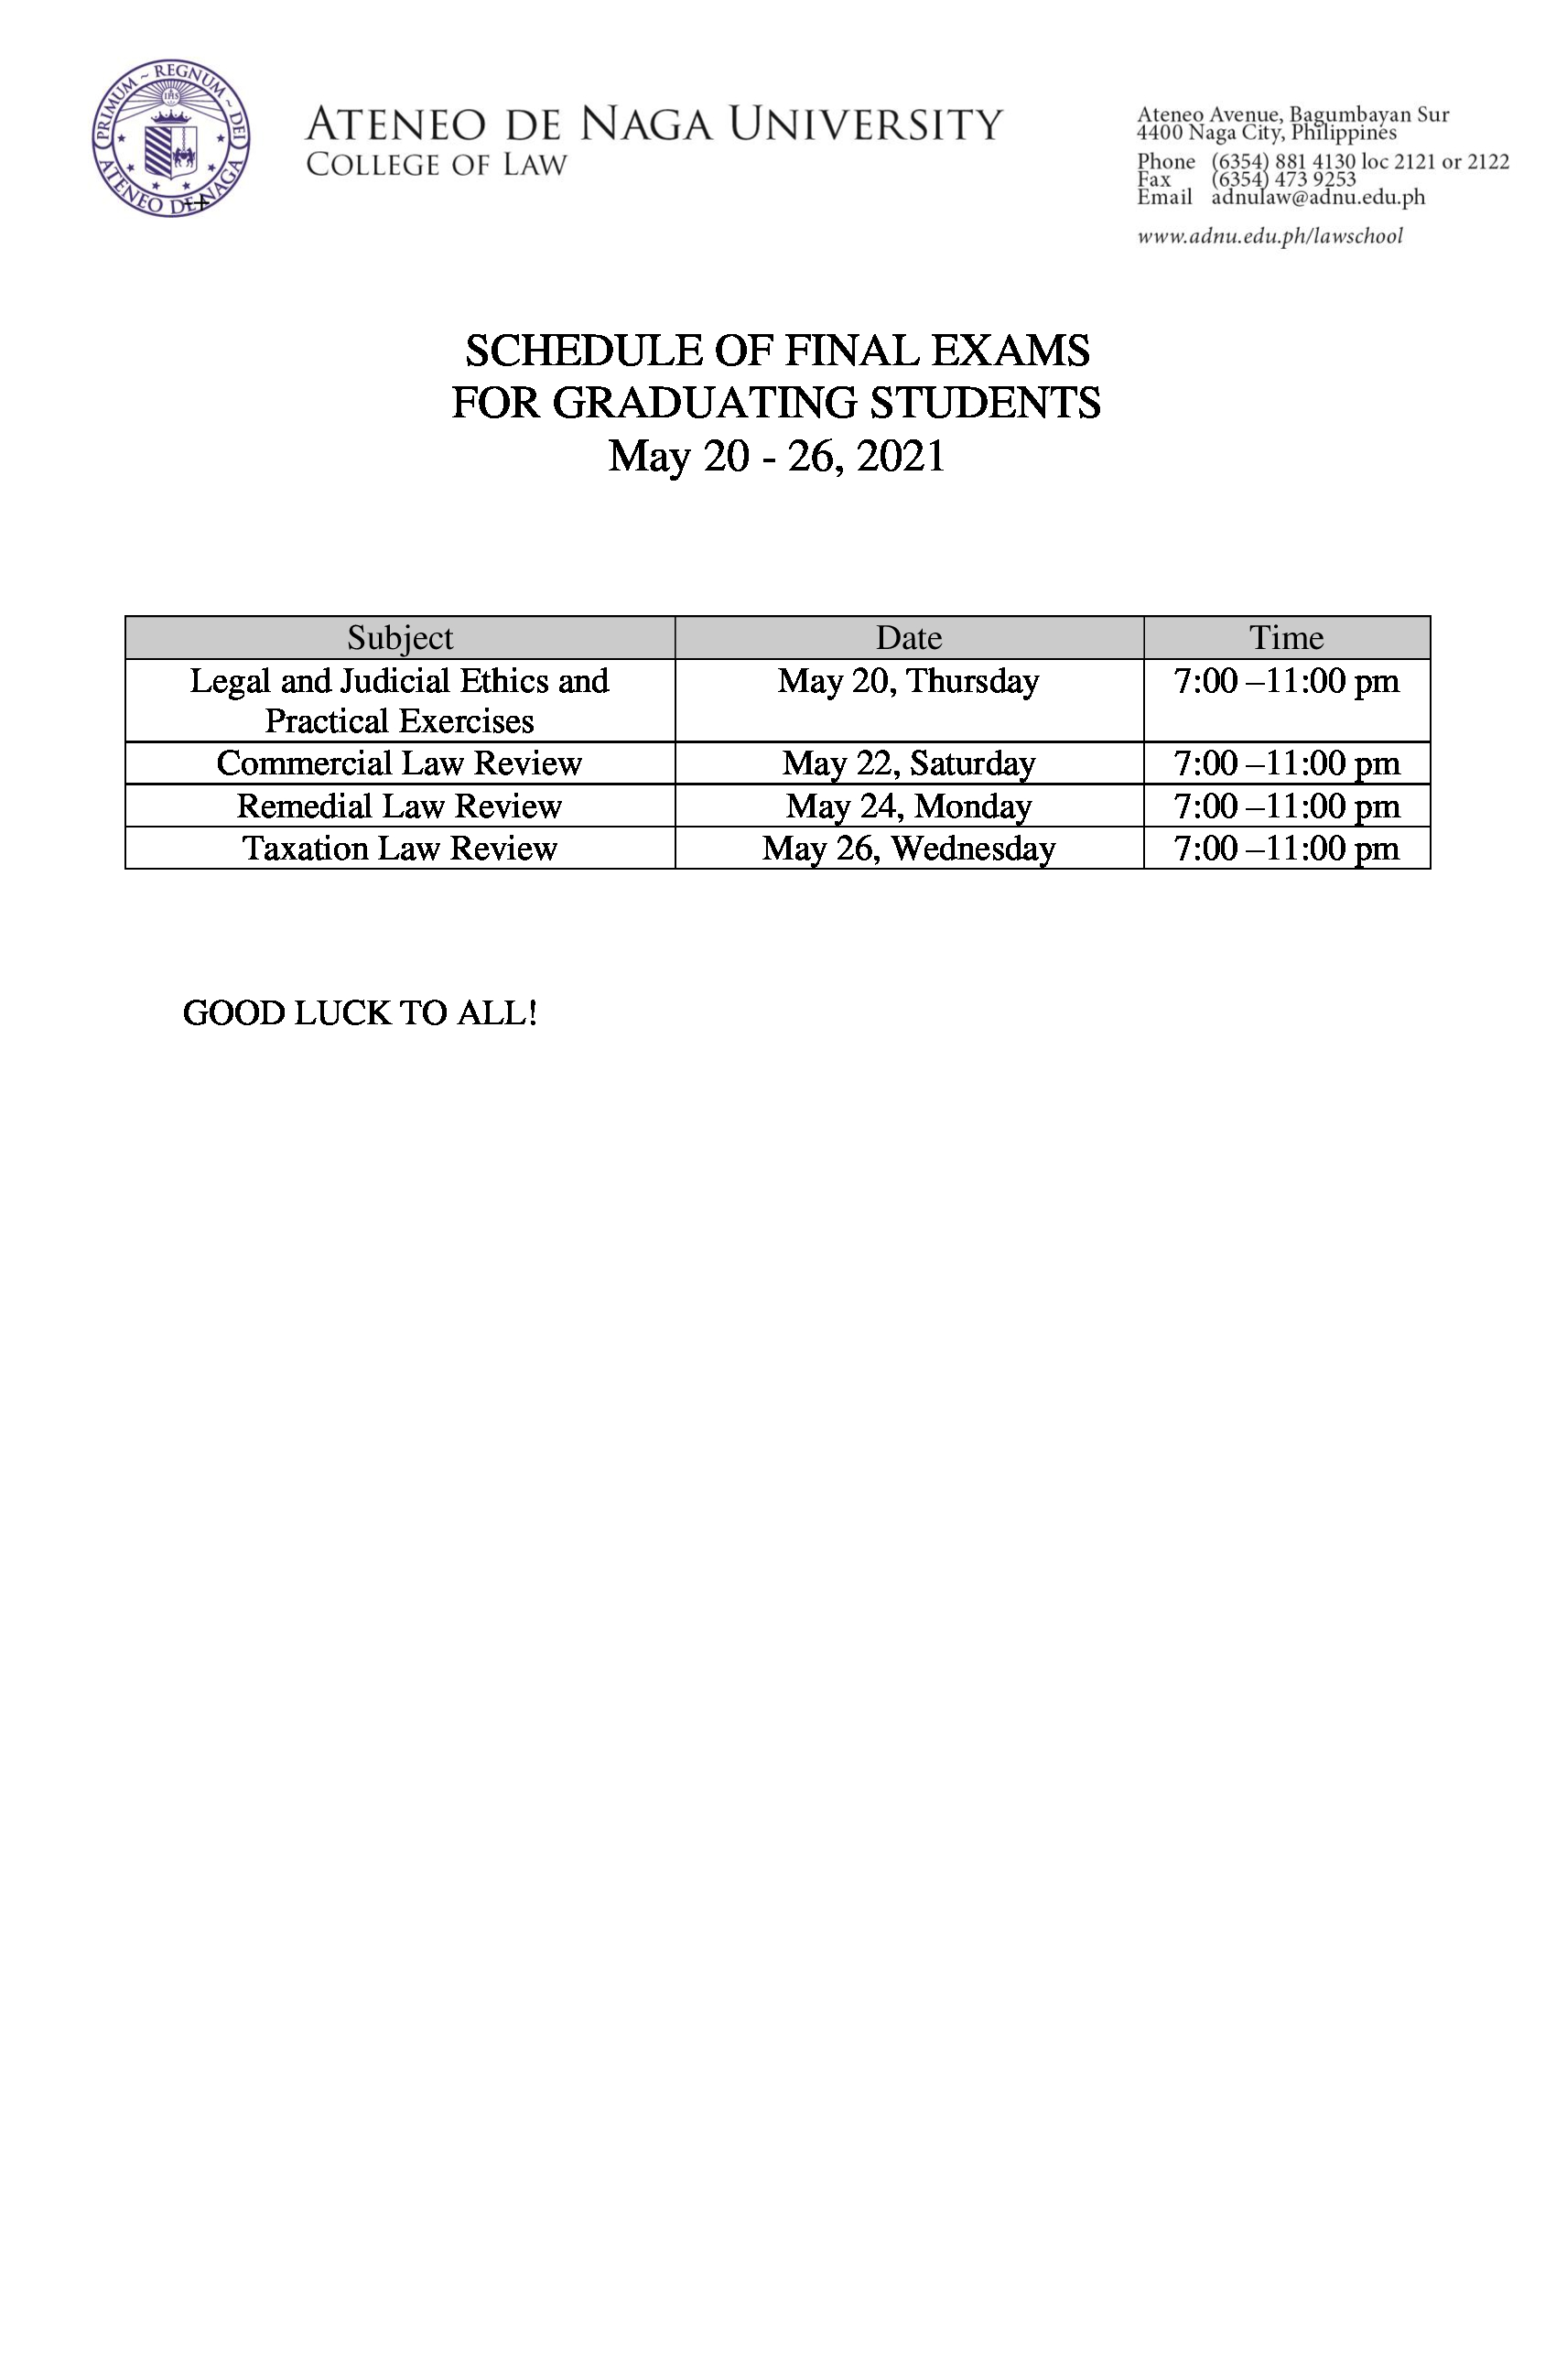 Final Examinations Schedule for Graduating Students